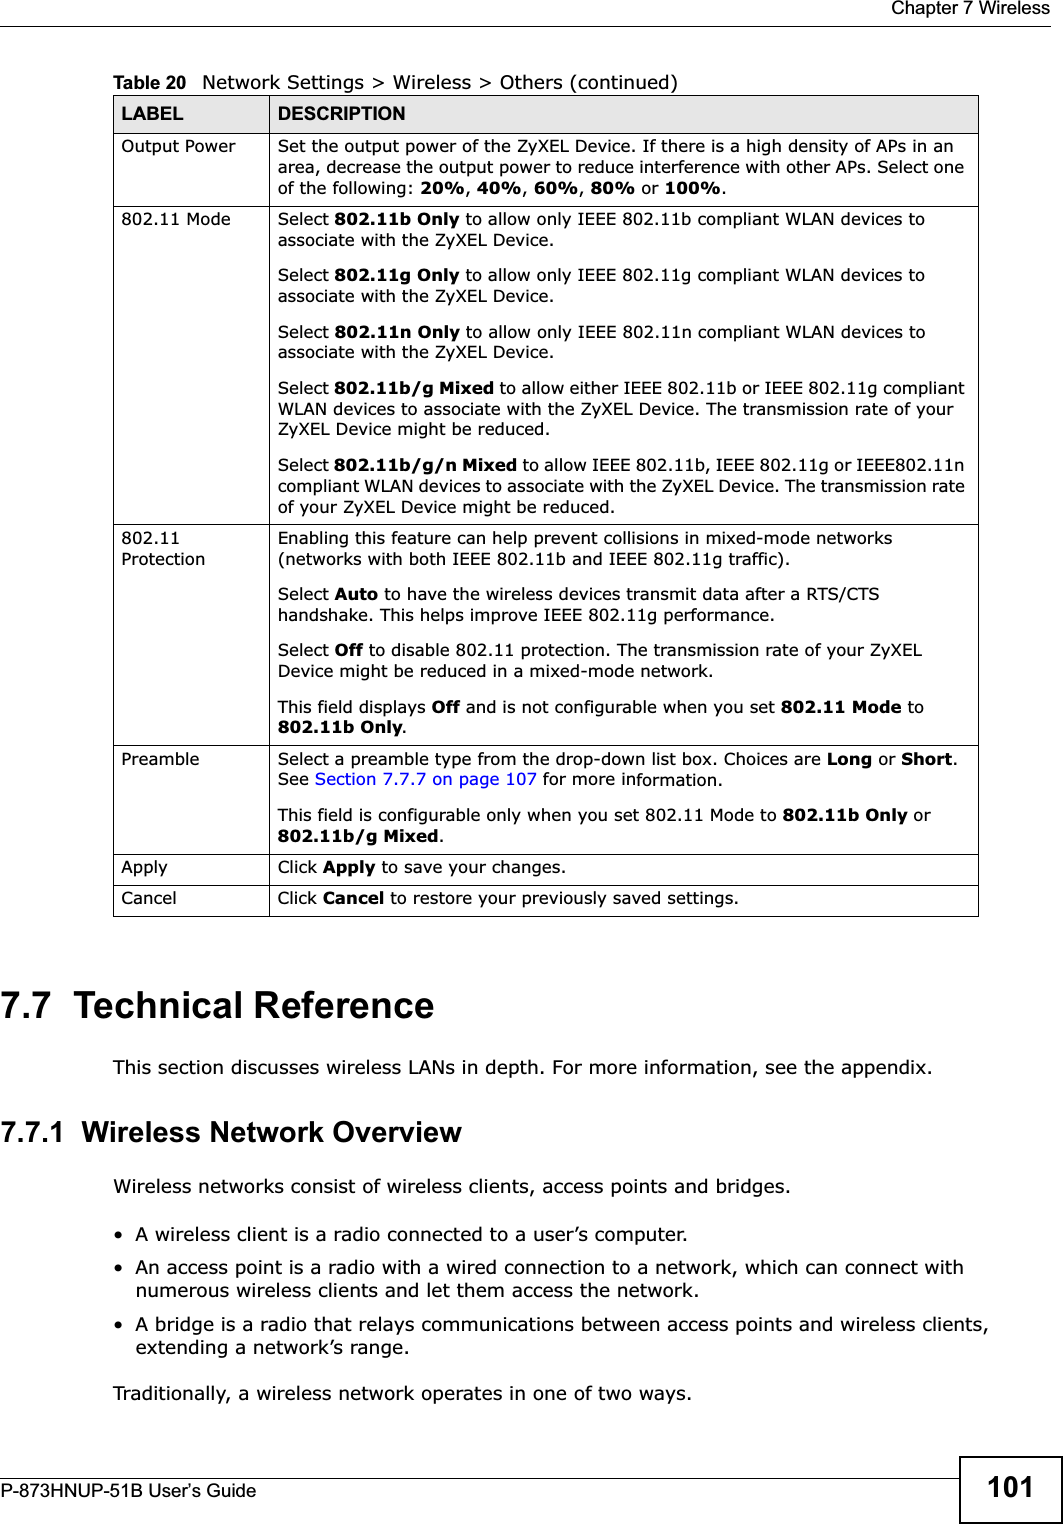  Chapter 7 WirelessP-873HNUP-51B User’s Guide 1017.7  Technical ReferenceThis section discusses wireless LANs in depth. For more information, see the appendix.7.7.1  Wireless Network OverviewWireless networks consist of wireless clients, access points and bridges. • A wireless client is a radio connected to a user’s computer. • An access point is a radio with a wired connection to a network, which can connect with numerous wireless clients and let them access the network. • A bridge is a radio that relays communications between access points and wireless clients, extending a network’s range. Traditionally, a wireless network operates in one of two ways.Output Power Set the output power of the ZyXEL Device. If there is a high density of APs in an area, decrease the output power to reduce interference with other APs. Select one of the following: 20%,40%,60%,80% or 100%.802.11 Mode Select 802.11b Only to allow only IEEE 802.11b compliant WLAN devices to associate with the ZyXEL Device.Select 802.11g Only to allow only IEEE 802.11g compliant WLAN devices to associate with the ZyXEL Device.Select 802.11n Only to allow only IEEE 802.11n compliant WLAN devices to associate with the ZyXEL Device.Select 802.11b/g Mixed to allow either IEEE 802.11b or IEEE 802.11g compliant WLAN devices to associate with the ZyXEL Device. The transmission rate of your ZyXEL Device might be reduced.Select 802.11b/g/n Mixed to allow IEEE 802.11b, IEEE 802.11g or IEEE802.11n compliant WLAN devices to associate with the ZyXEL Device. The transmission rate of your ZyXEL Device might be reduced.802.11 ProtectionEnabling this feature can help prevent collisions in mixed-mode networks (networks with both IEEE 802.11b and IEEE 802.11g traffic).Select Auto to have the wireless devices transmit data after a RTS/CTS handshake. This helps improve IEEE 802.11g performance.Select Off to disable 802.11 protection. The transmission rate of your ZyXEL Device might be reduced in a mixed-mode network.This field displays Off and is not configurable when you set 802.11 Mode to 802.11b Only.Preamble Select a preamble type from the drop-down list box. Choices are Long or Short.See Section 7.7.7 on page 107 for more information.This field is configurable only when you set 802.11 Mode to 802.11b Only or802.11b/g Mixed.Apply Click Apply to save your changes.Cancel Click Cancel to restore your previously saved settings.Table 20   Network Settings &gt; Wireless &gt; Others (continued)LABEL DESCRIPTION